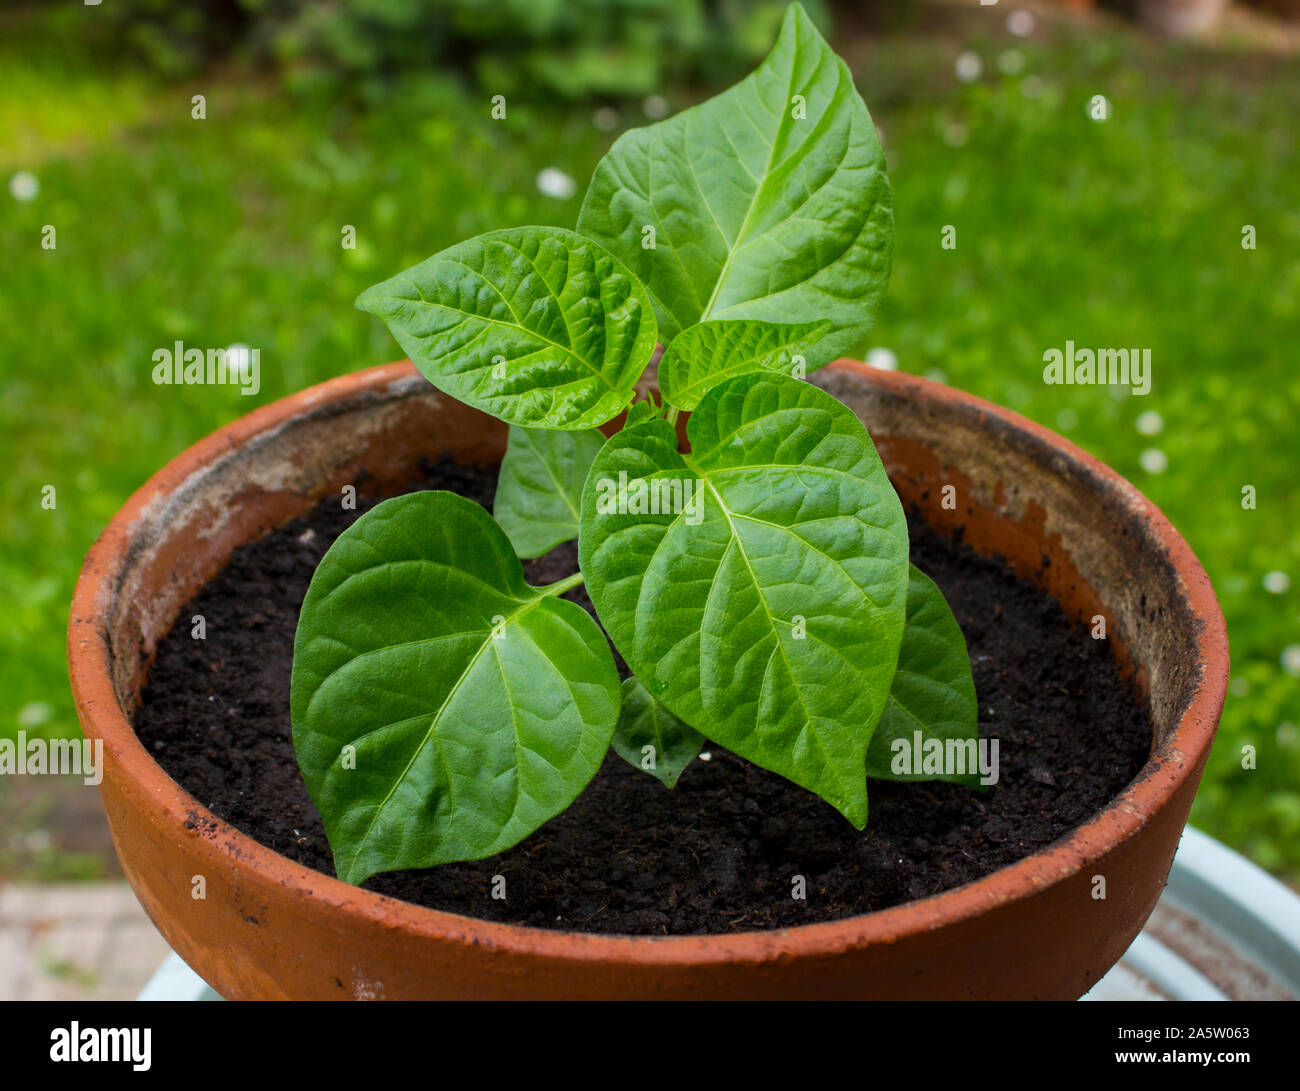 Trinidad Moruga Scorpion chili pepper (Capsicum Chinense) Plant in a pot. 4 weeks old. Stock Photo